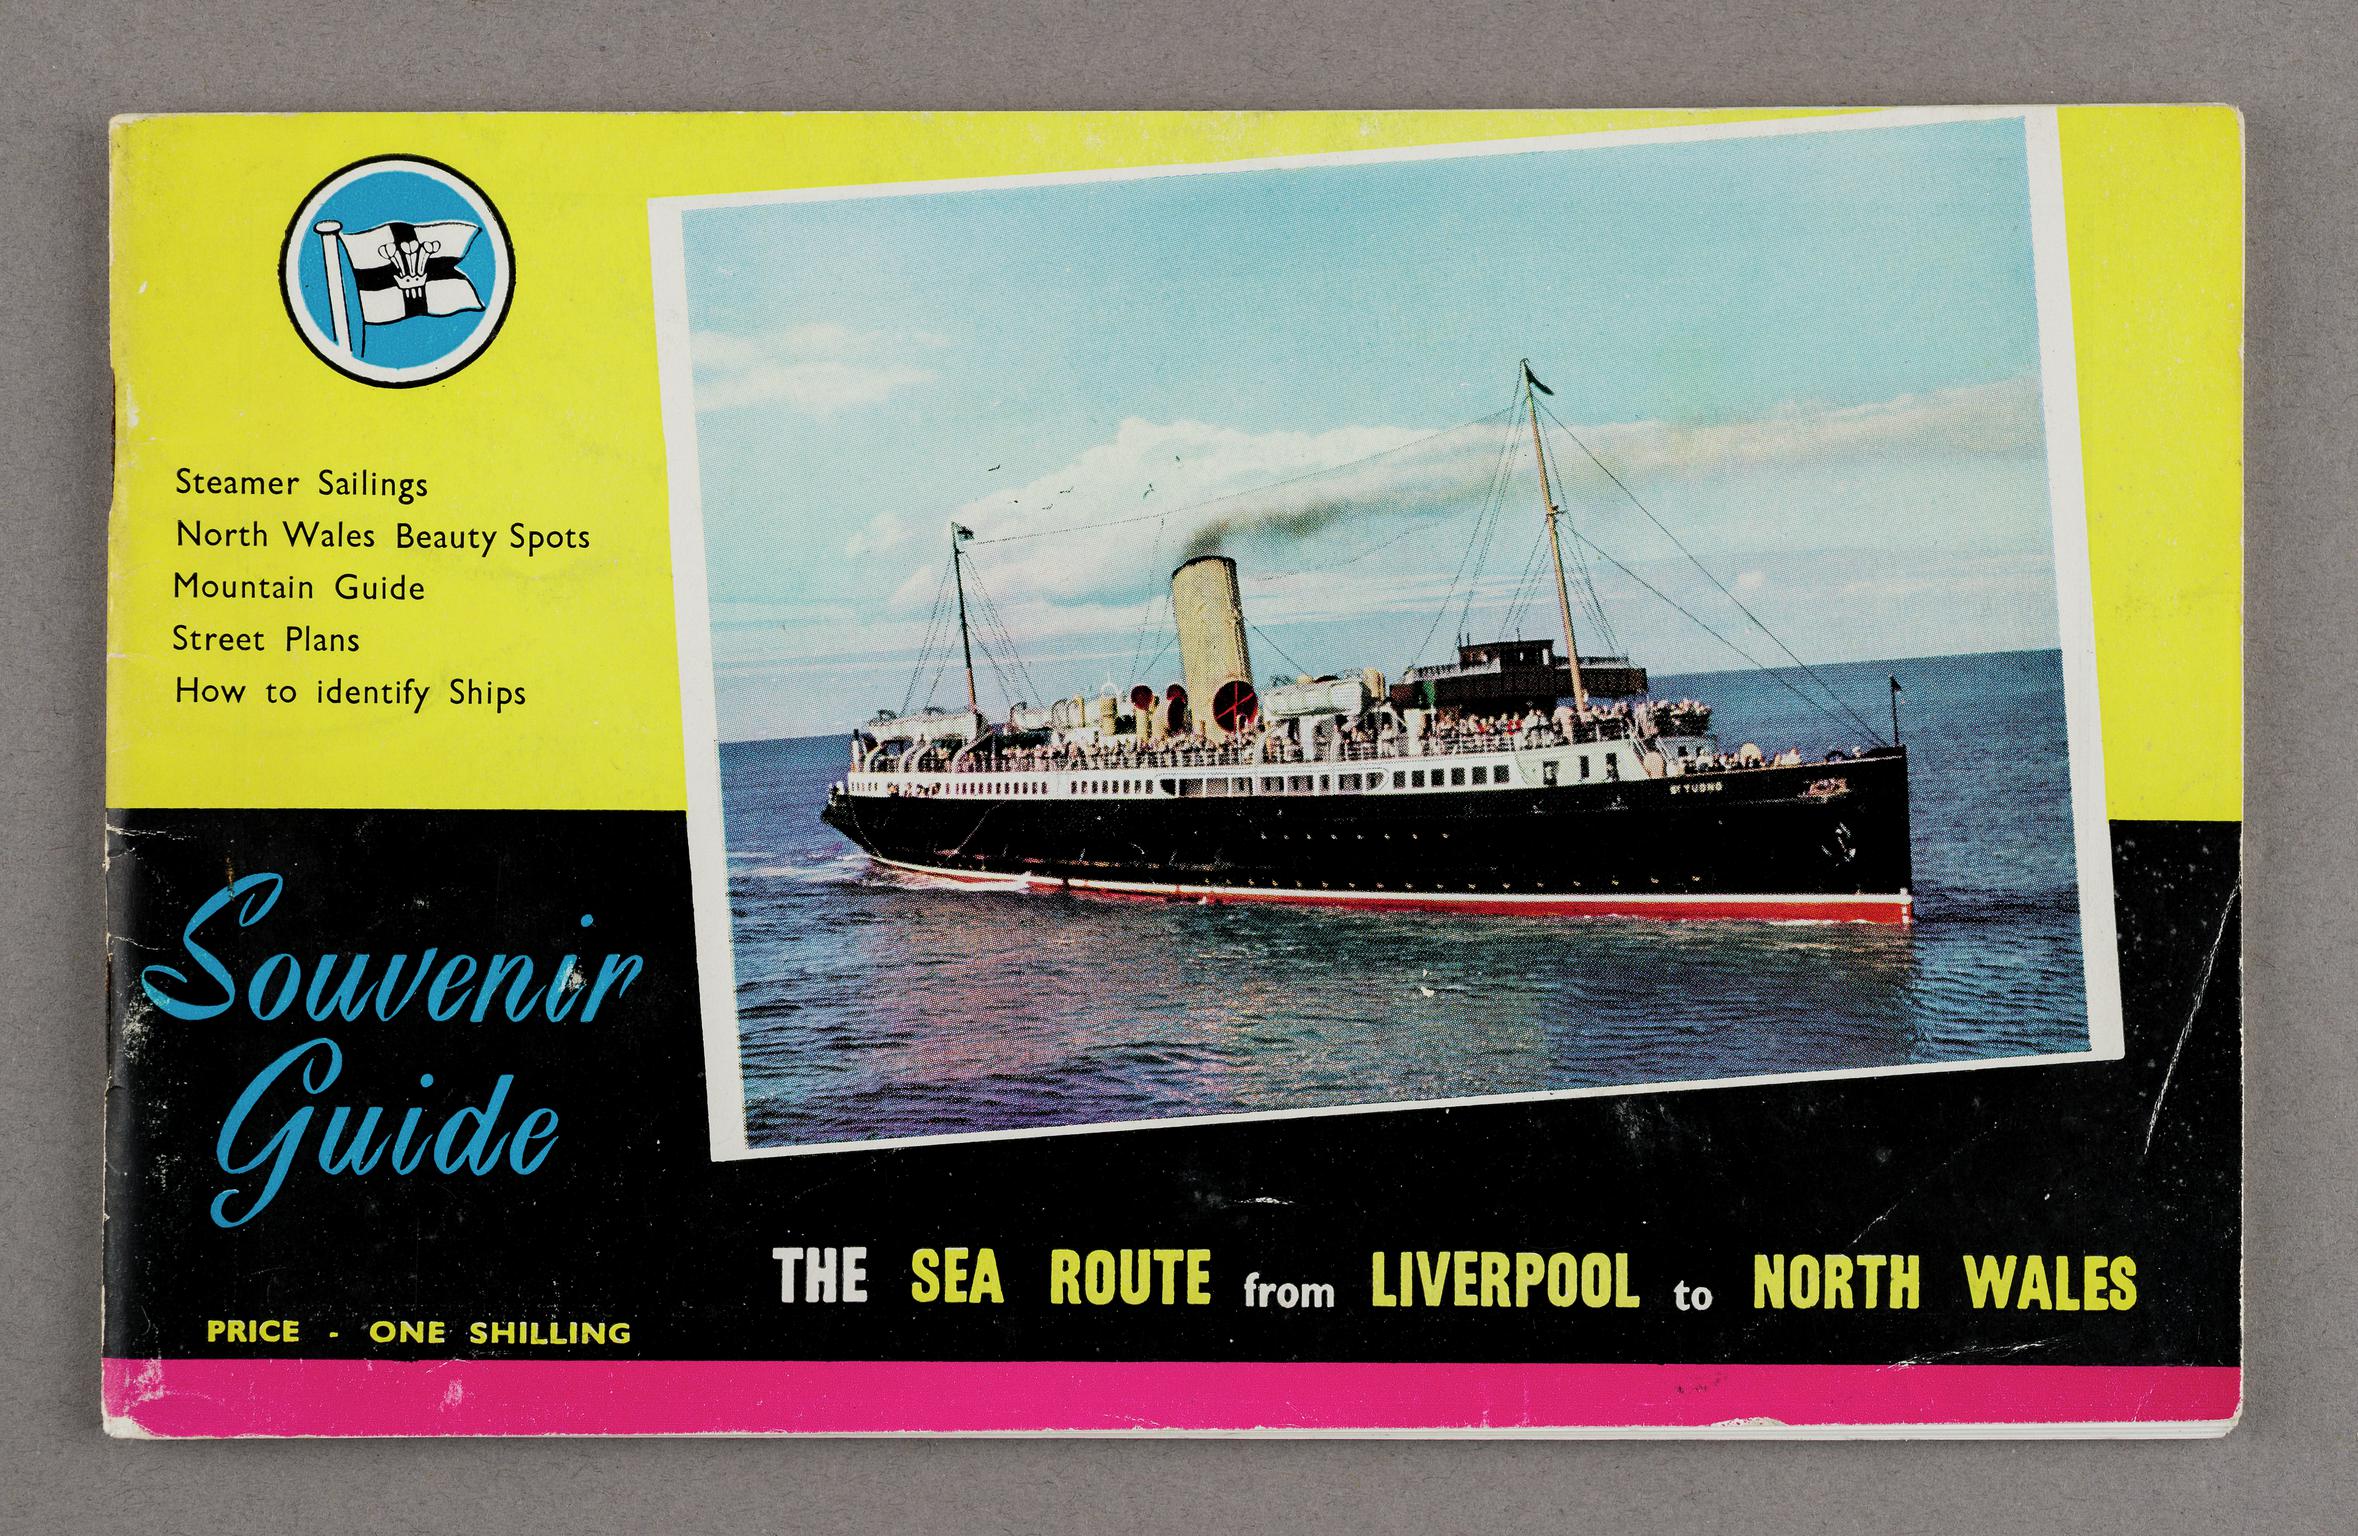 The Sea Route from Liverpool to North Wales (brochure)